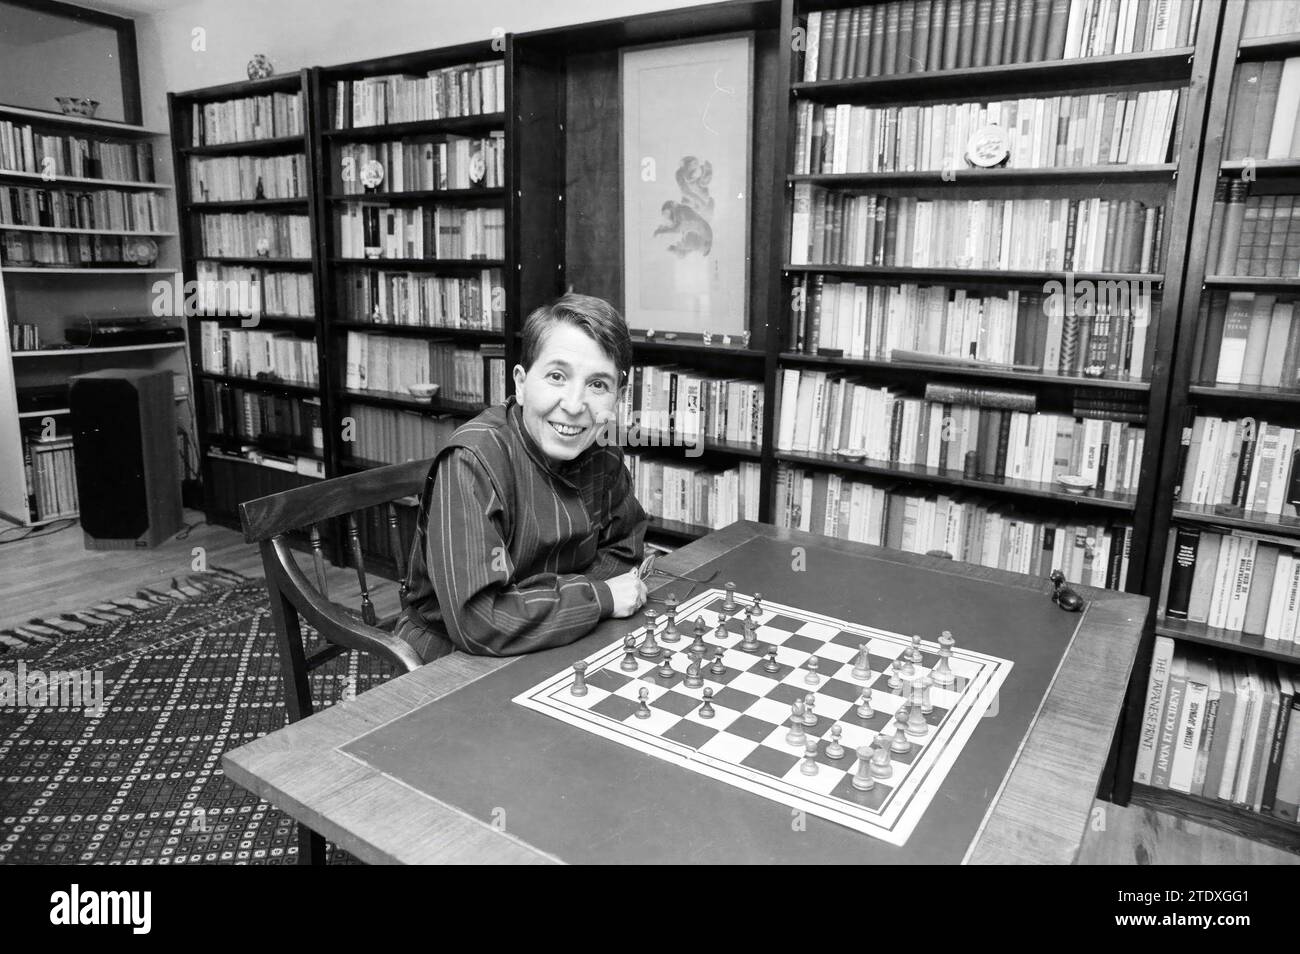 Chess player Mrs. Van der Meye, Chess, 21-12-1988, Whizgle News from the Past, Tailored for the Future. Explore historical narratives, Dutch The Netherlands agency image with a modern perspective, bridging the gap between yesterday's events and tomorrow's insights. A timeless journey shaping the stories that shape our future. Stock Photo